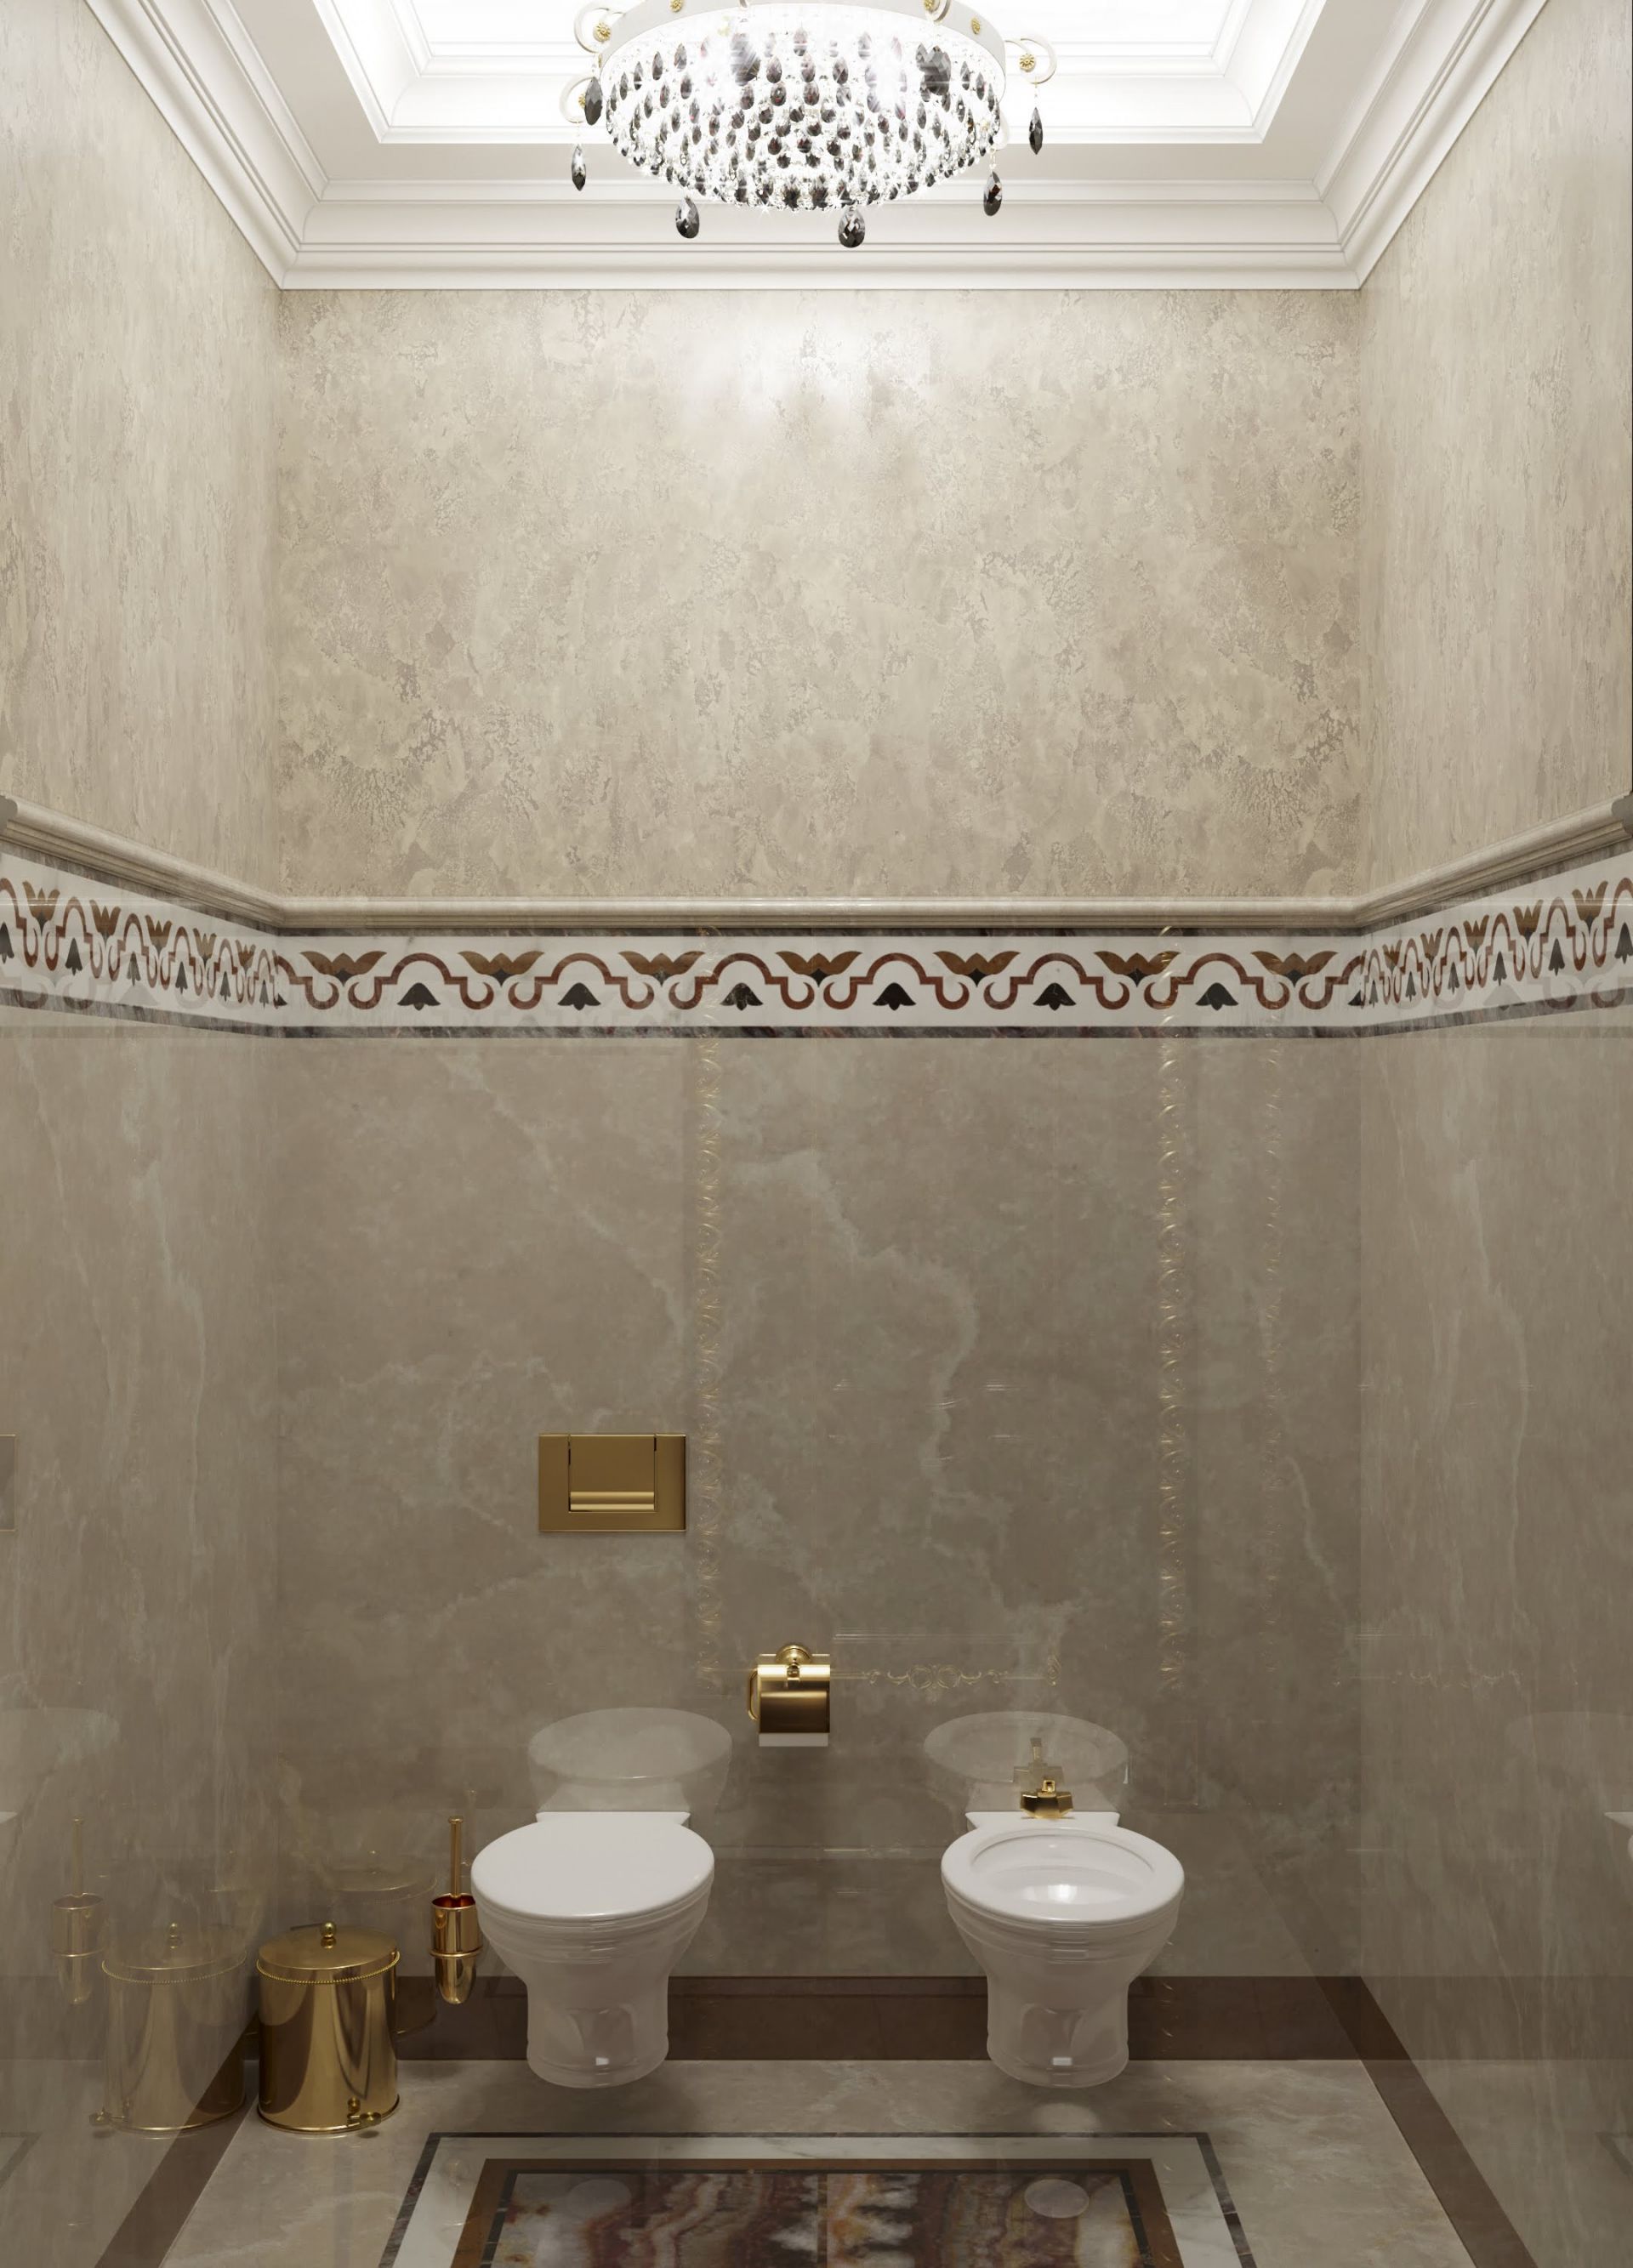 Sanitary room interior in classic style